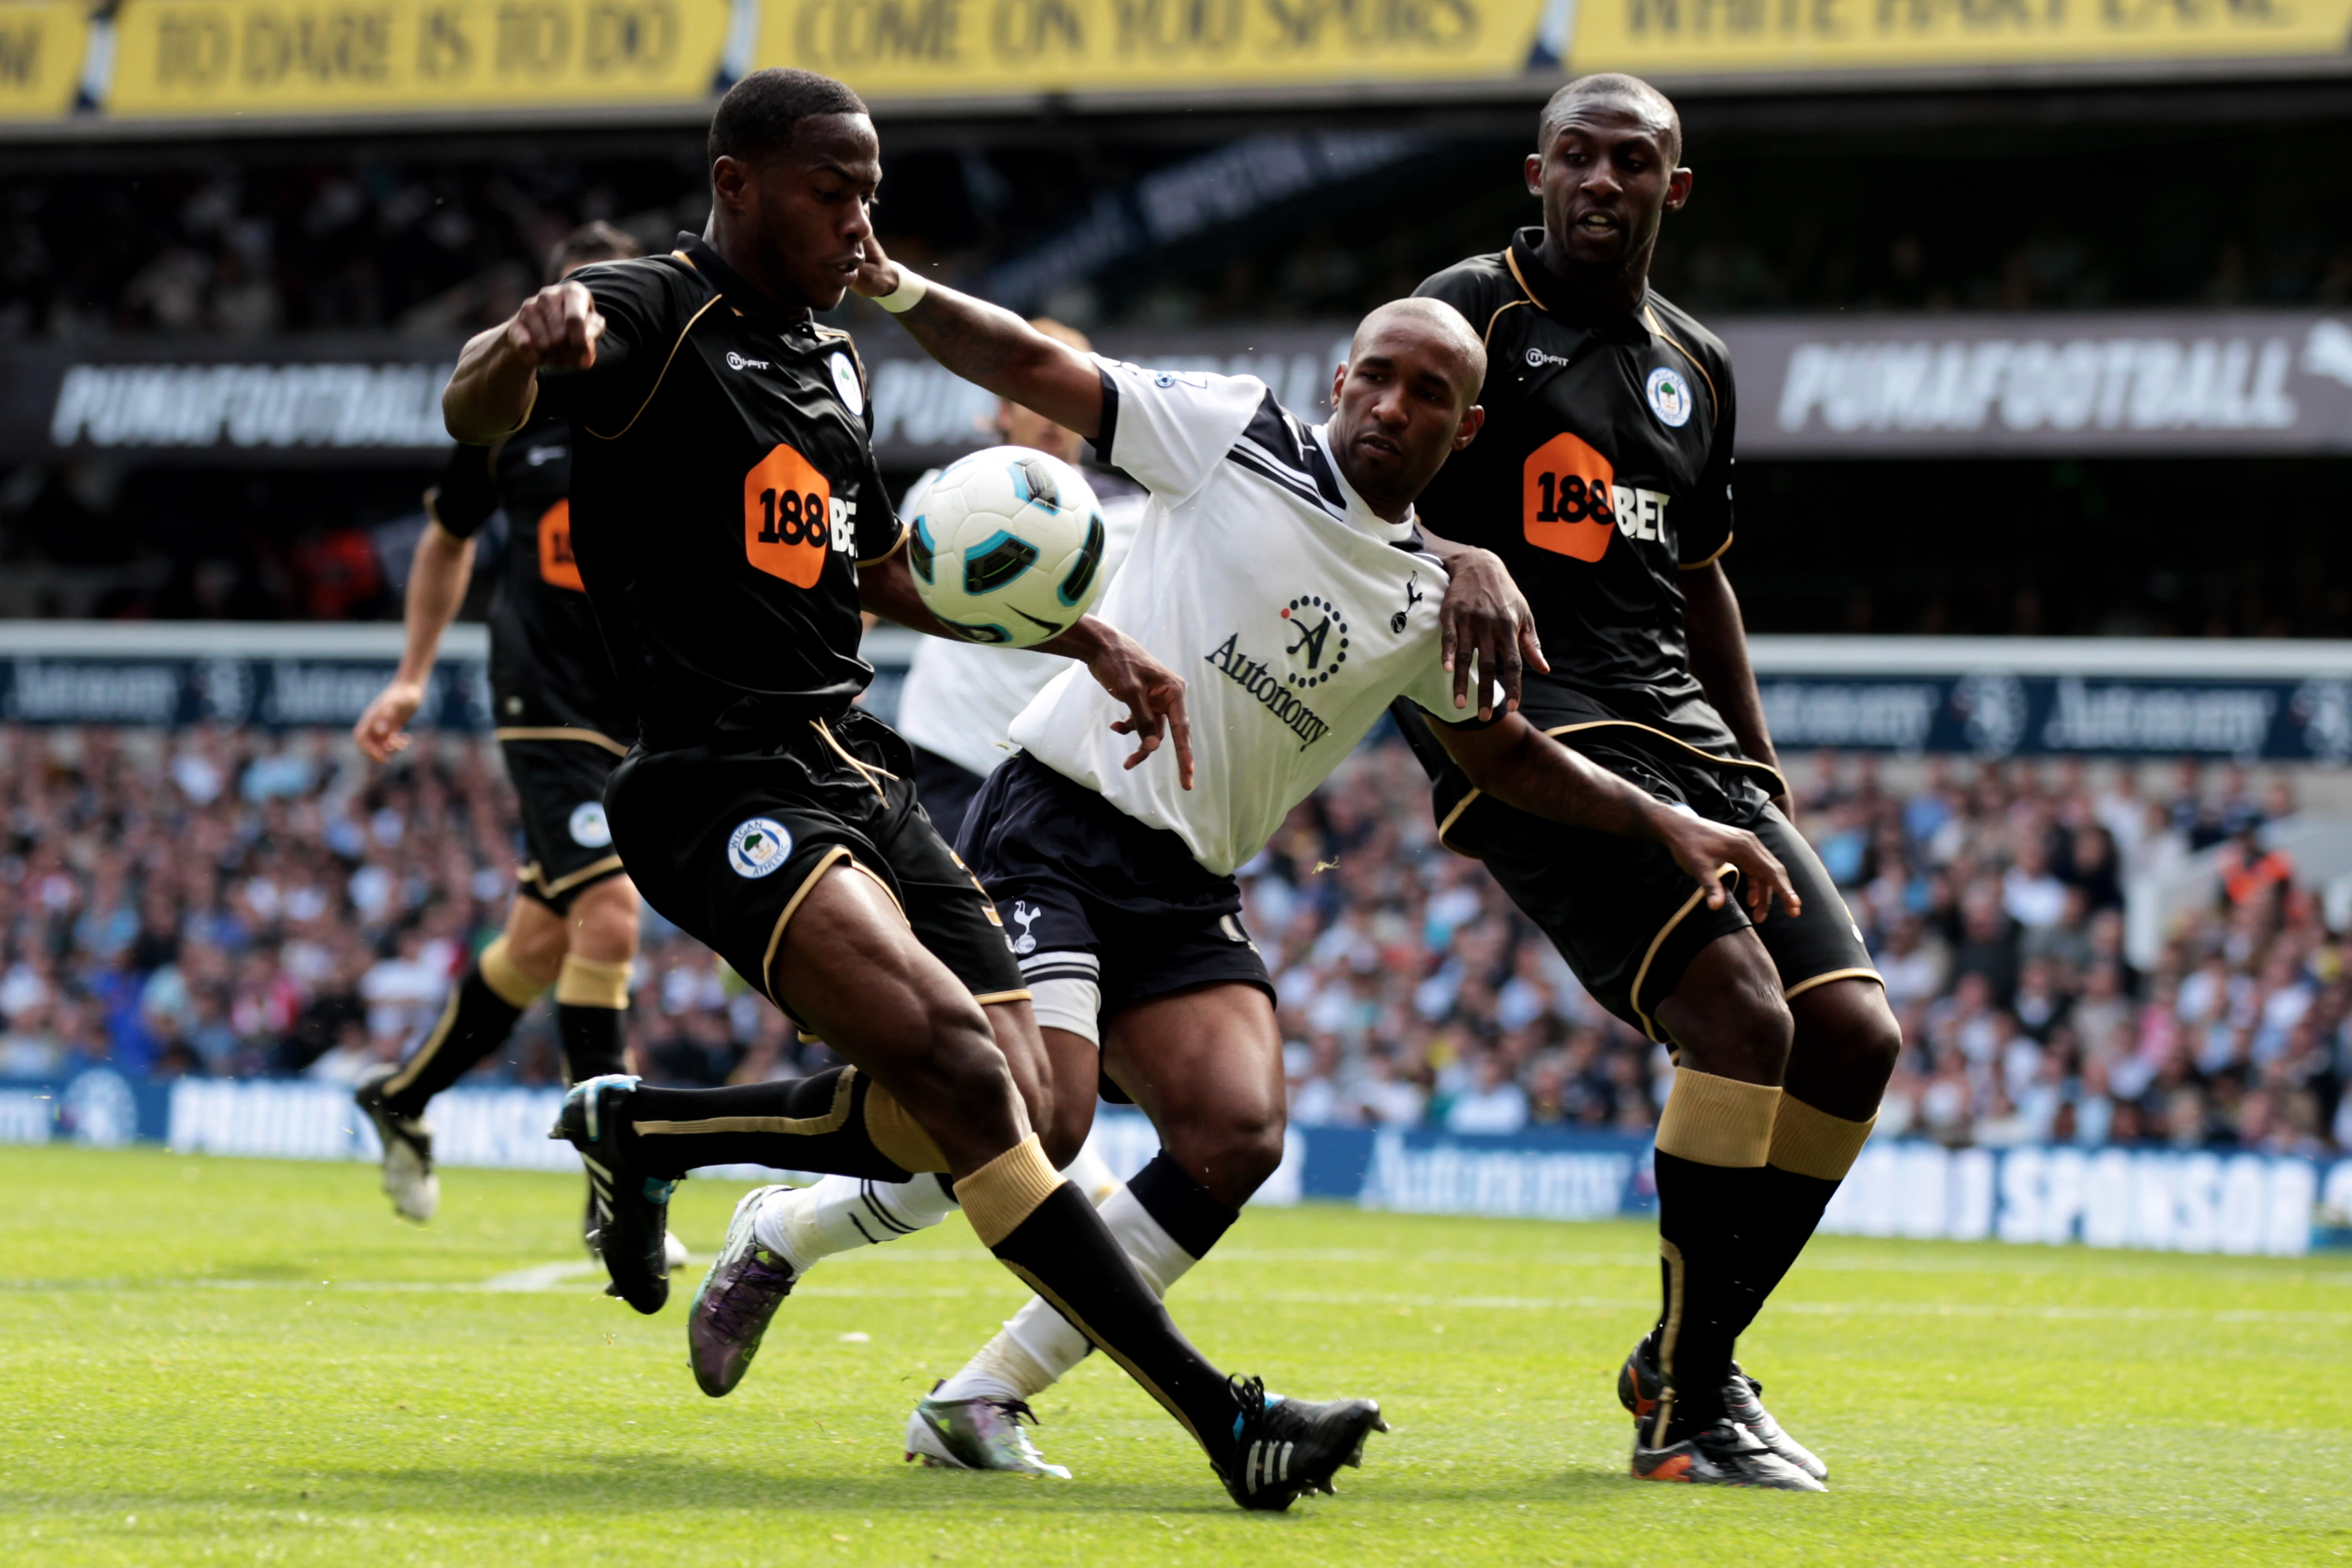 LONDON, ENGLAND - AUGUST 28:  Jermain Defoe of Tottenham battles for the ball with Steve Gohouri and Maynor Figueroa of Wigan during the Barclays Premier League match between Tottenham Hotspur and Wigan Athletic at White Hart Lane on August 28, 2010 in Lo